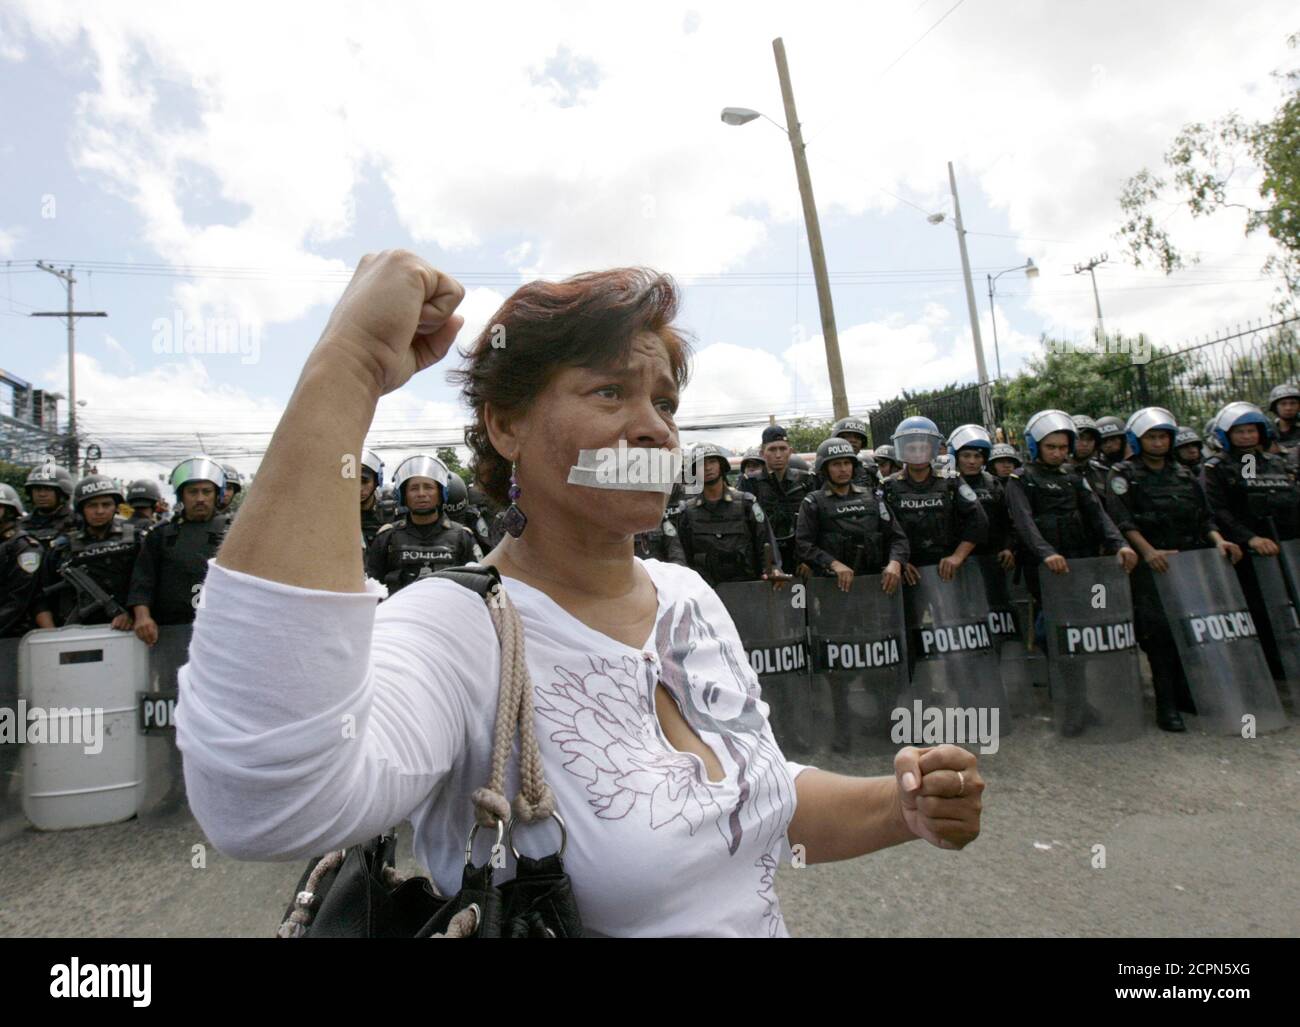 A supporter of Honduras' ousted President Manuel Zelaya shouts next to riot police with her mouth taped during a protest in Tegucigalpa September 28, 2009. Honduras' de facto government on Monday resisted pressure from opponents and the international community over ousted President Manuel Zelaya, who for a week has been holed up inside the Brazilian embassy seeking a return to power.  REUTERS/Henry Romero (HONDURAS MILITARY POLITICS CONFLICT) Stock Photo